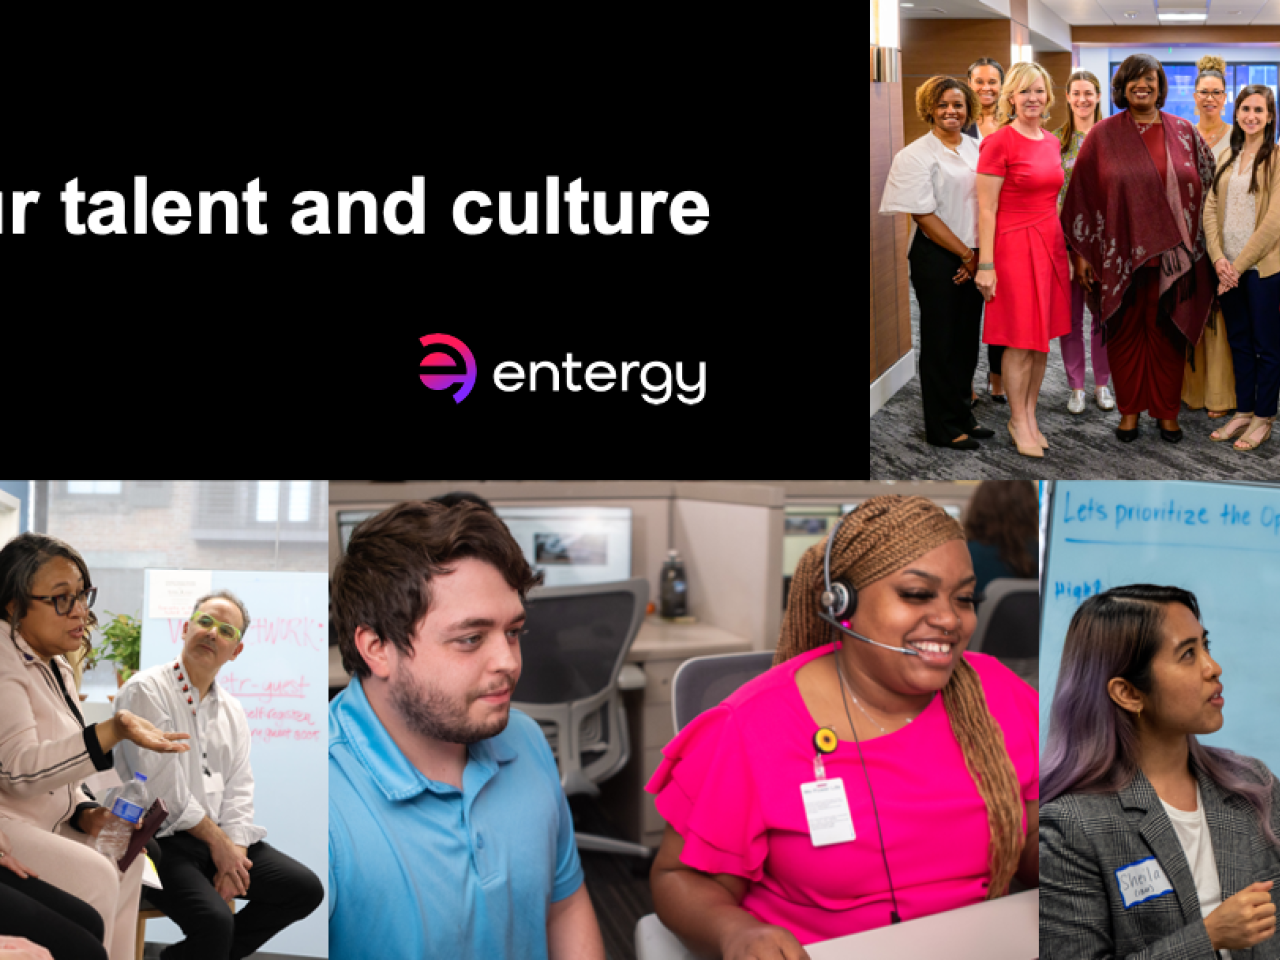 Collage of Entergy employees, "Our talent and culture"